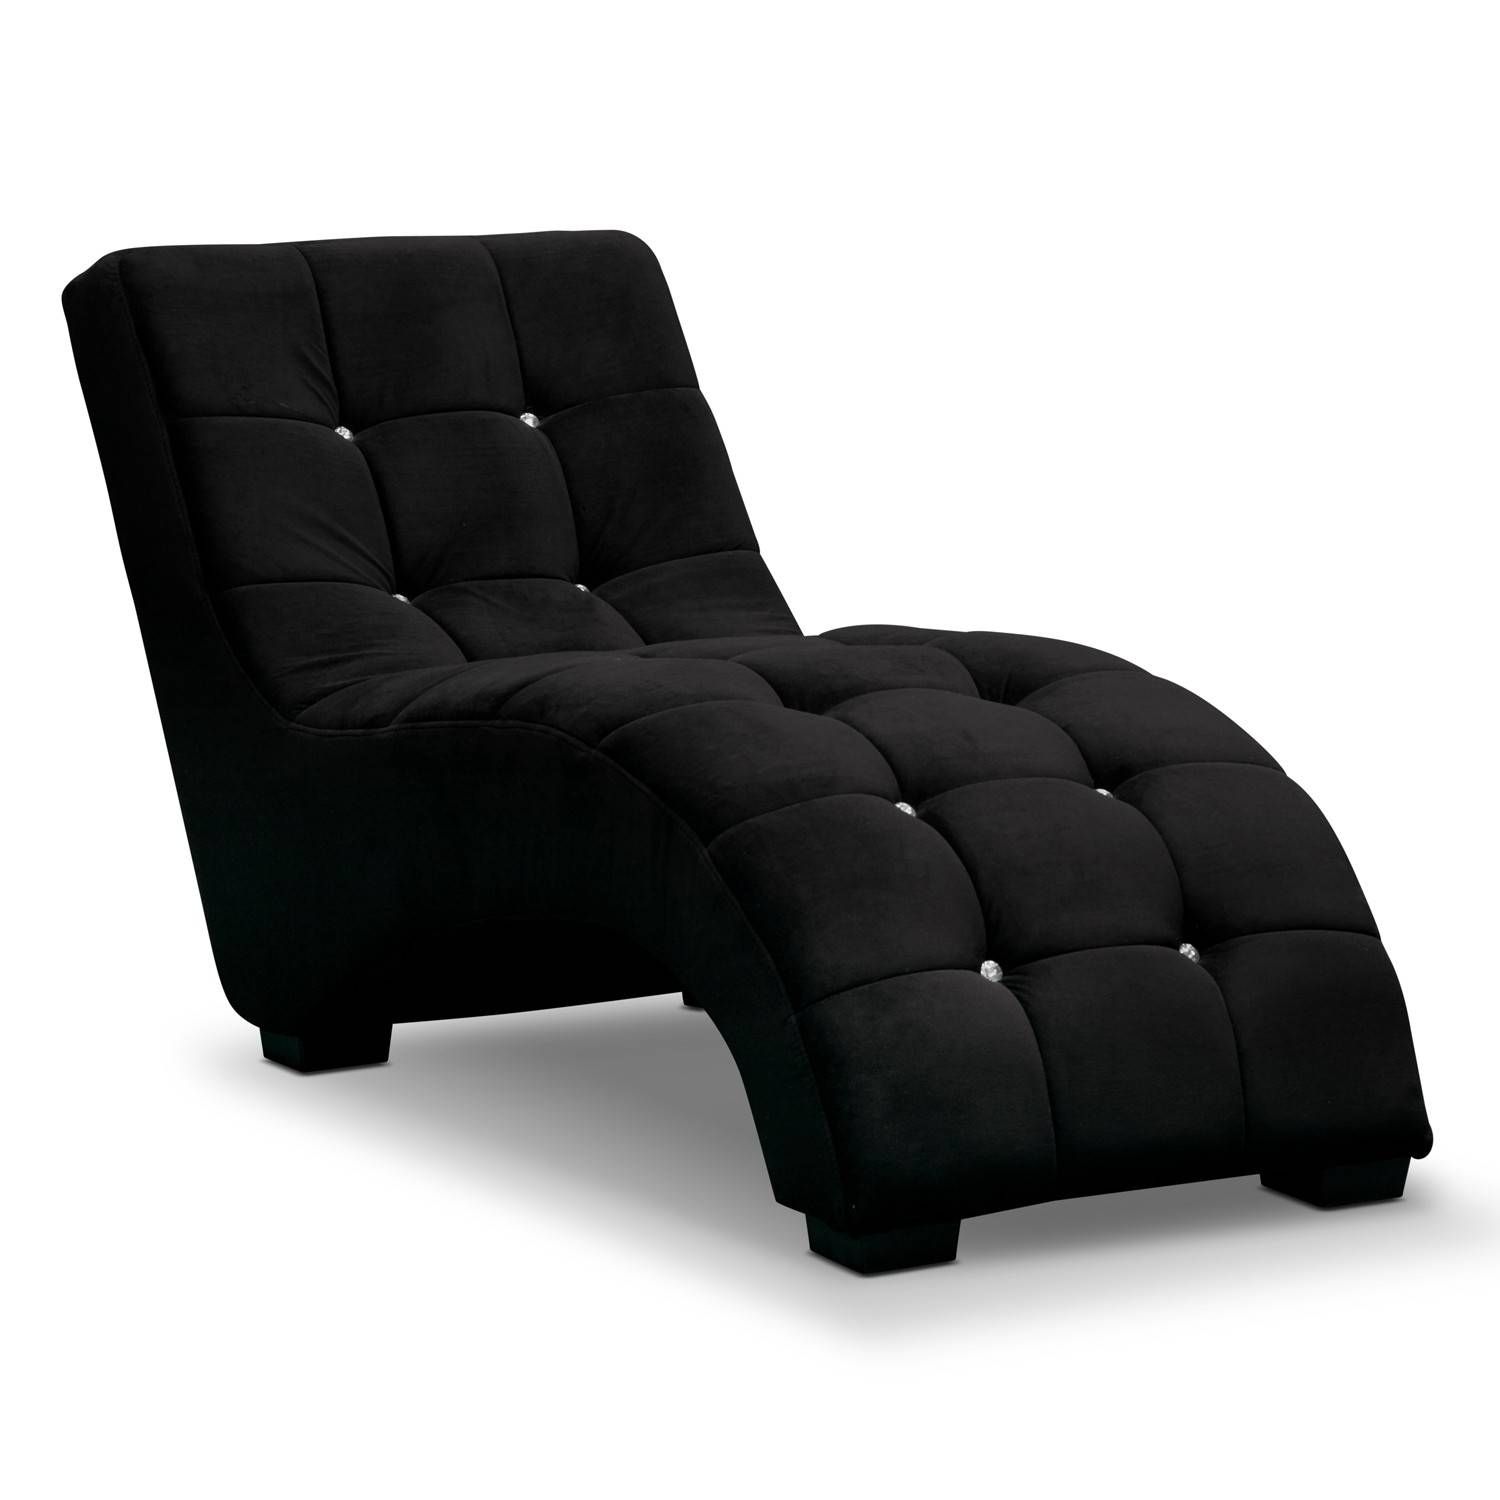 Surprising Lounge Sofa Chair In Styles Of Chairs With Additional With Regard To Lounge Sofas And Chairs (View 10 of 12)